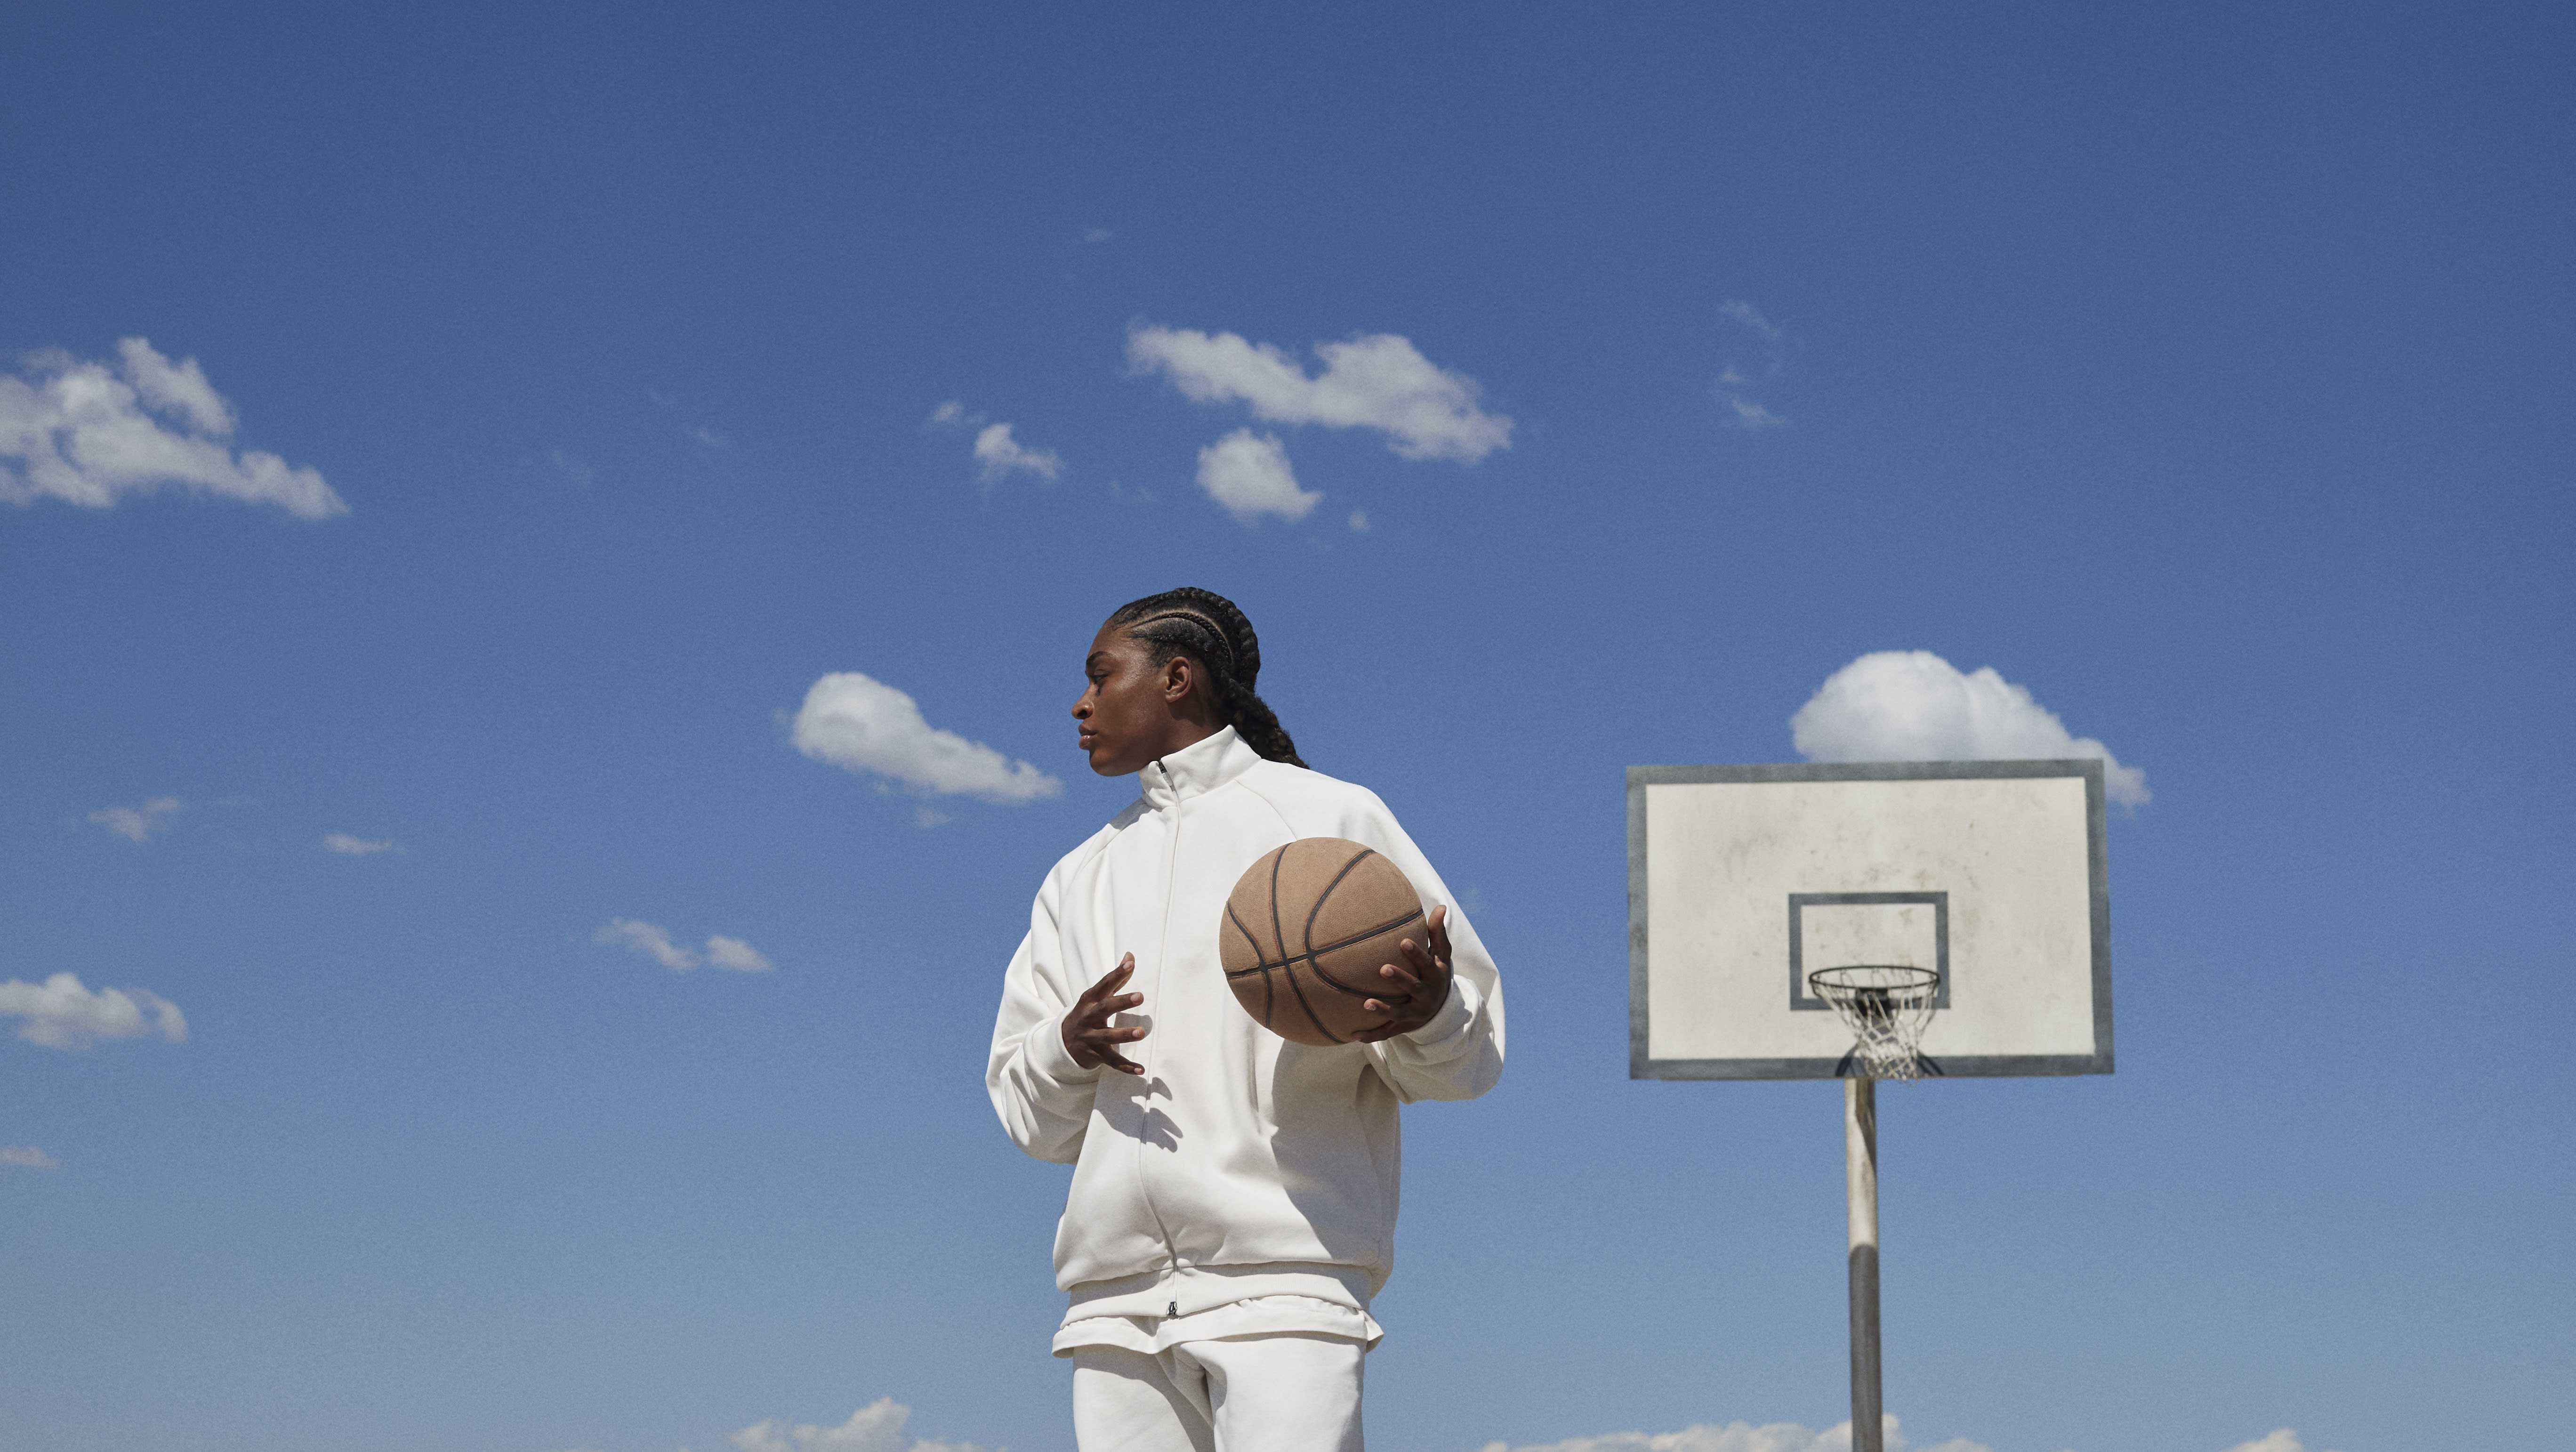 A girl in front of a basketball backboard holding a basketball